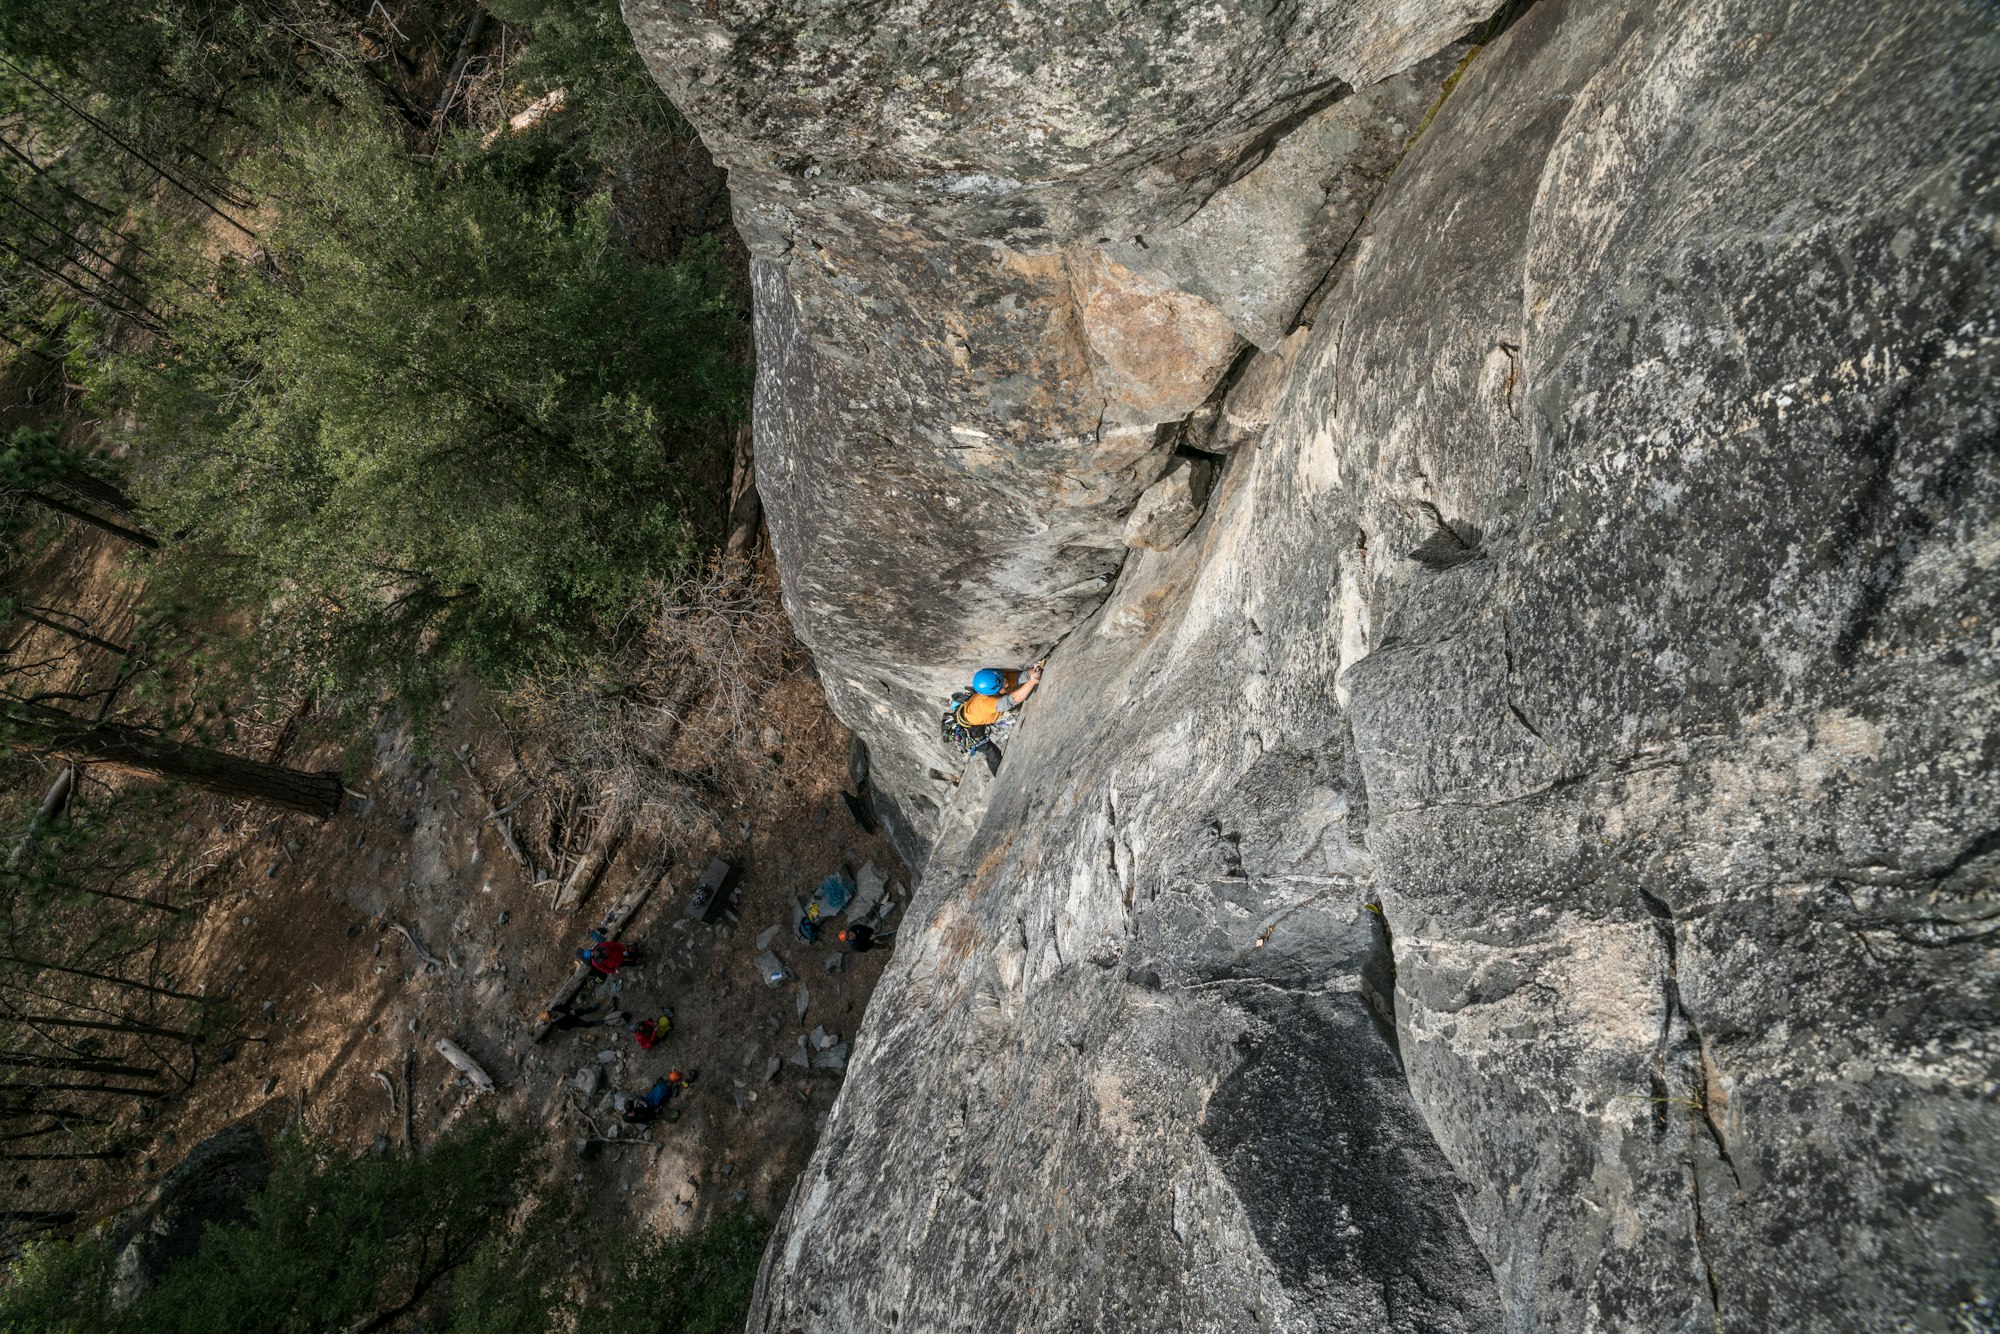 Jon Sui Leading the first pitch of 5 on After 6 in Yosemite National Park.